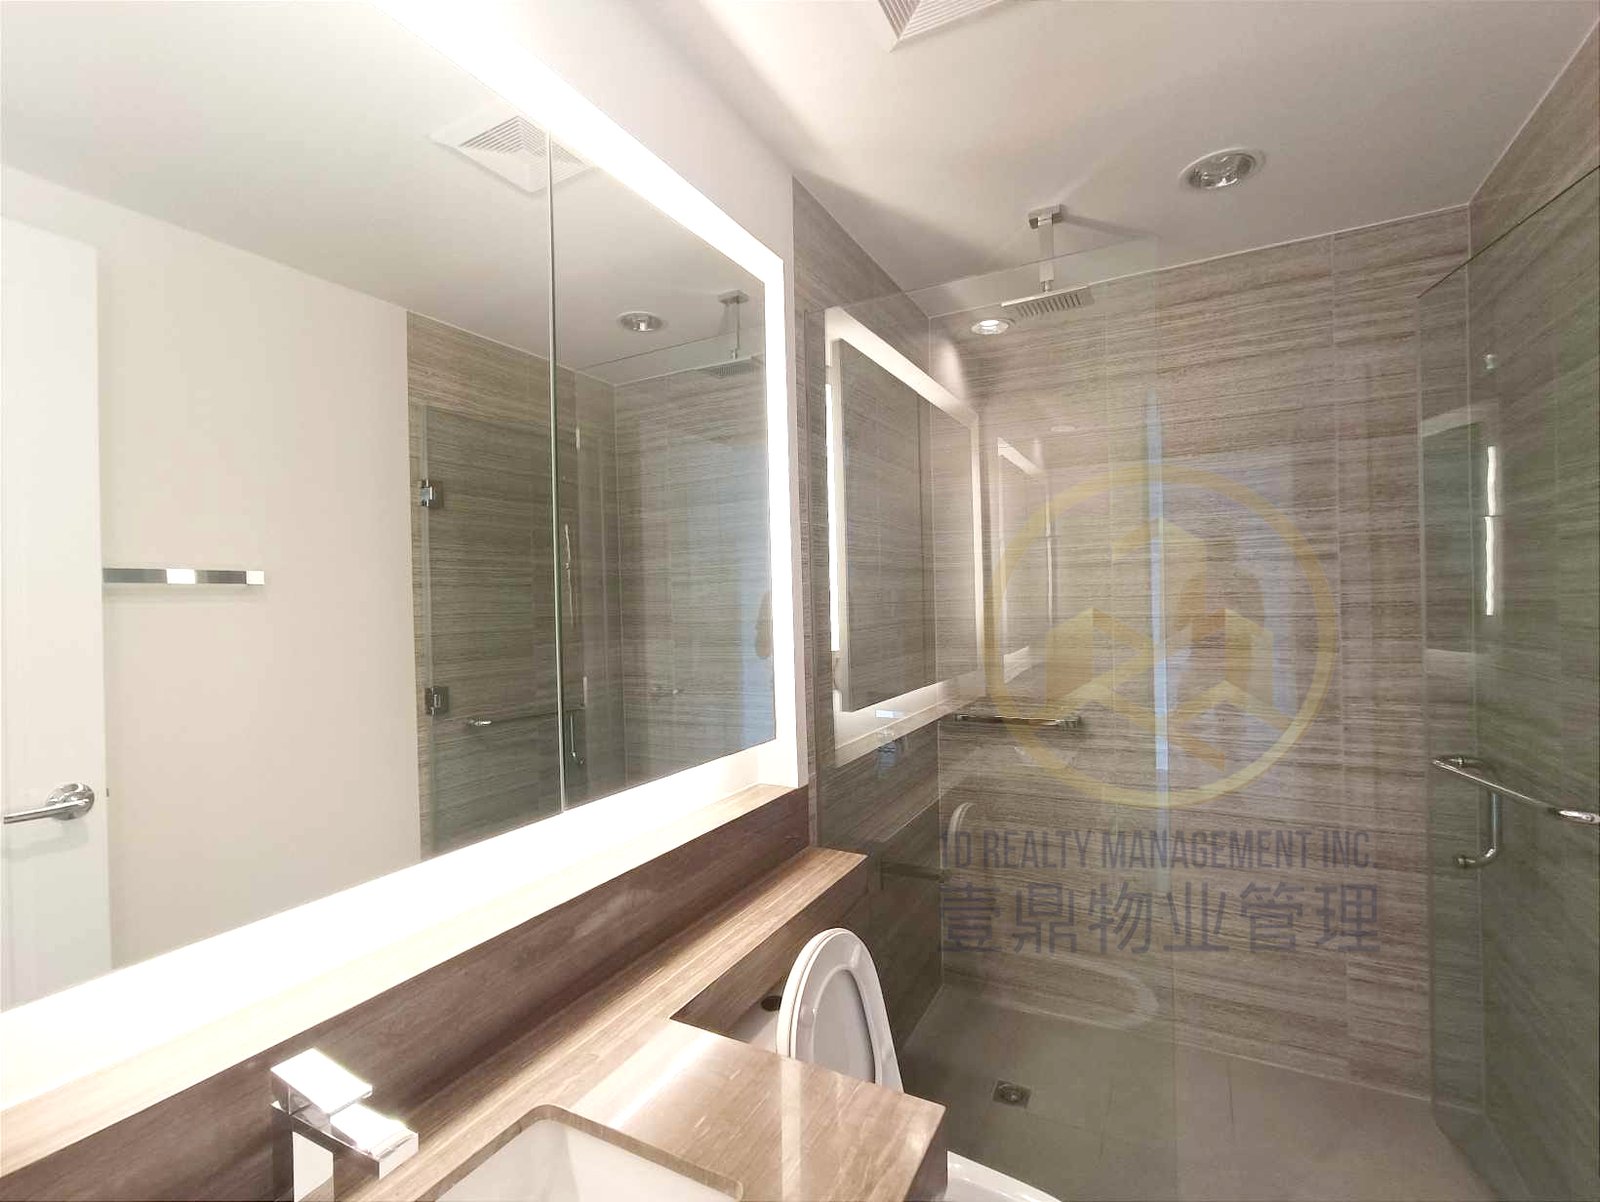 FOR SALE 1BR - The Proscenium Rockwell - Rockwell Center, Makati City